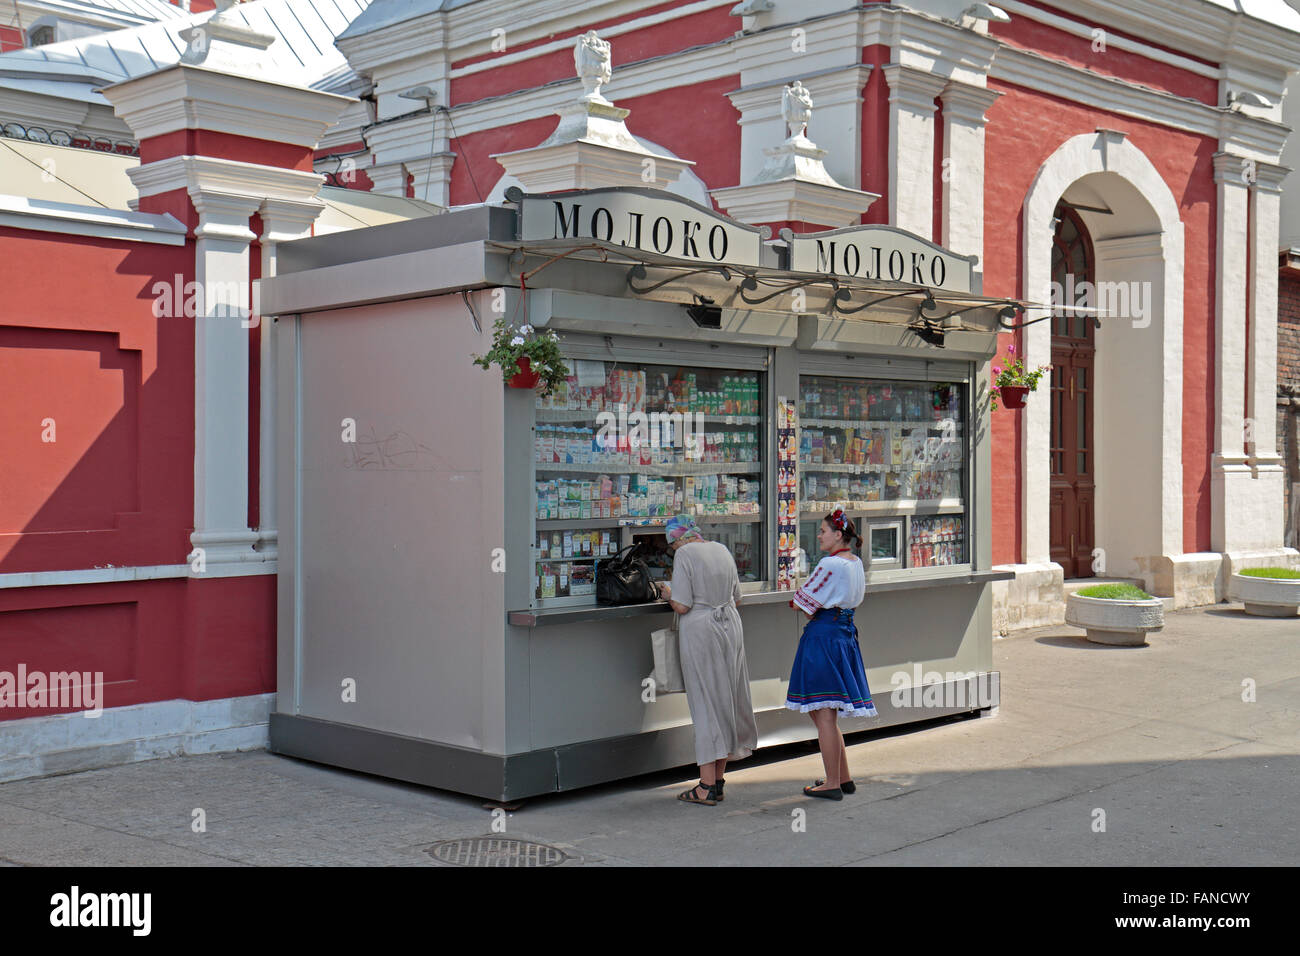 A convenience store type kiosk selling drinks, ice cream and snacks in Moscow, Russia. Stock Photo